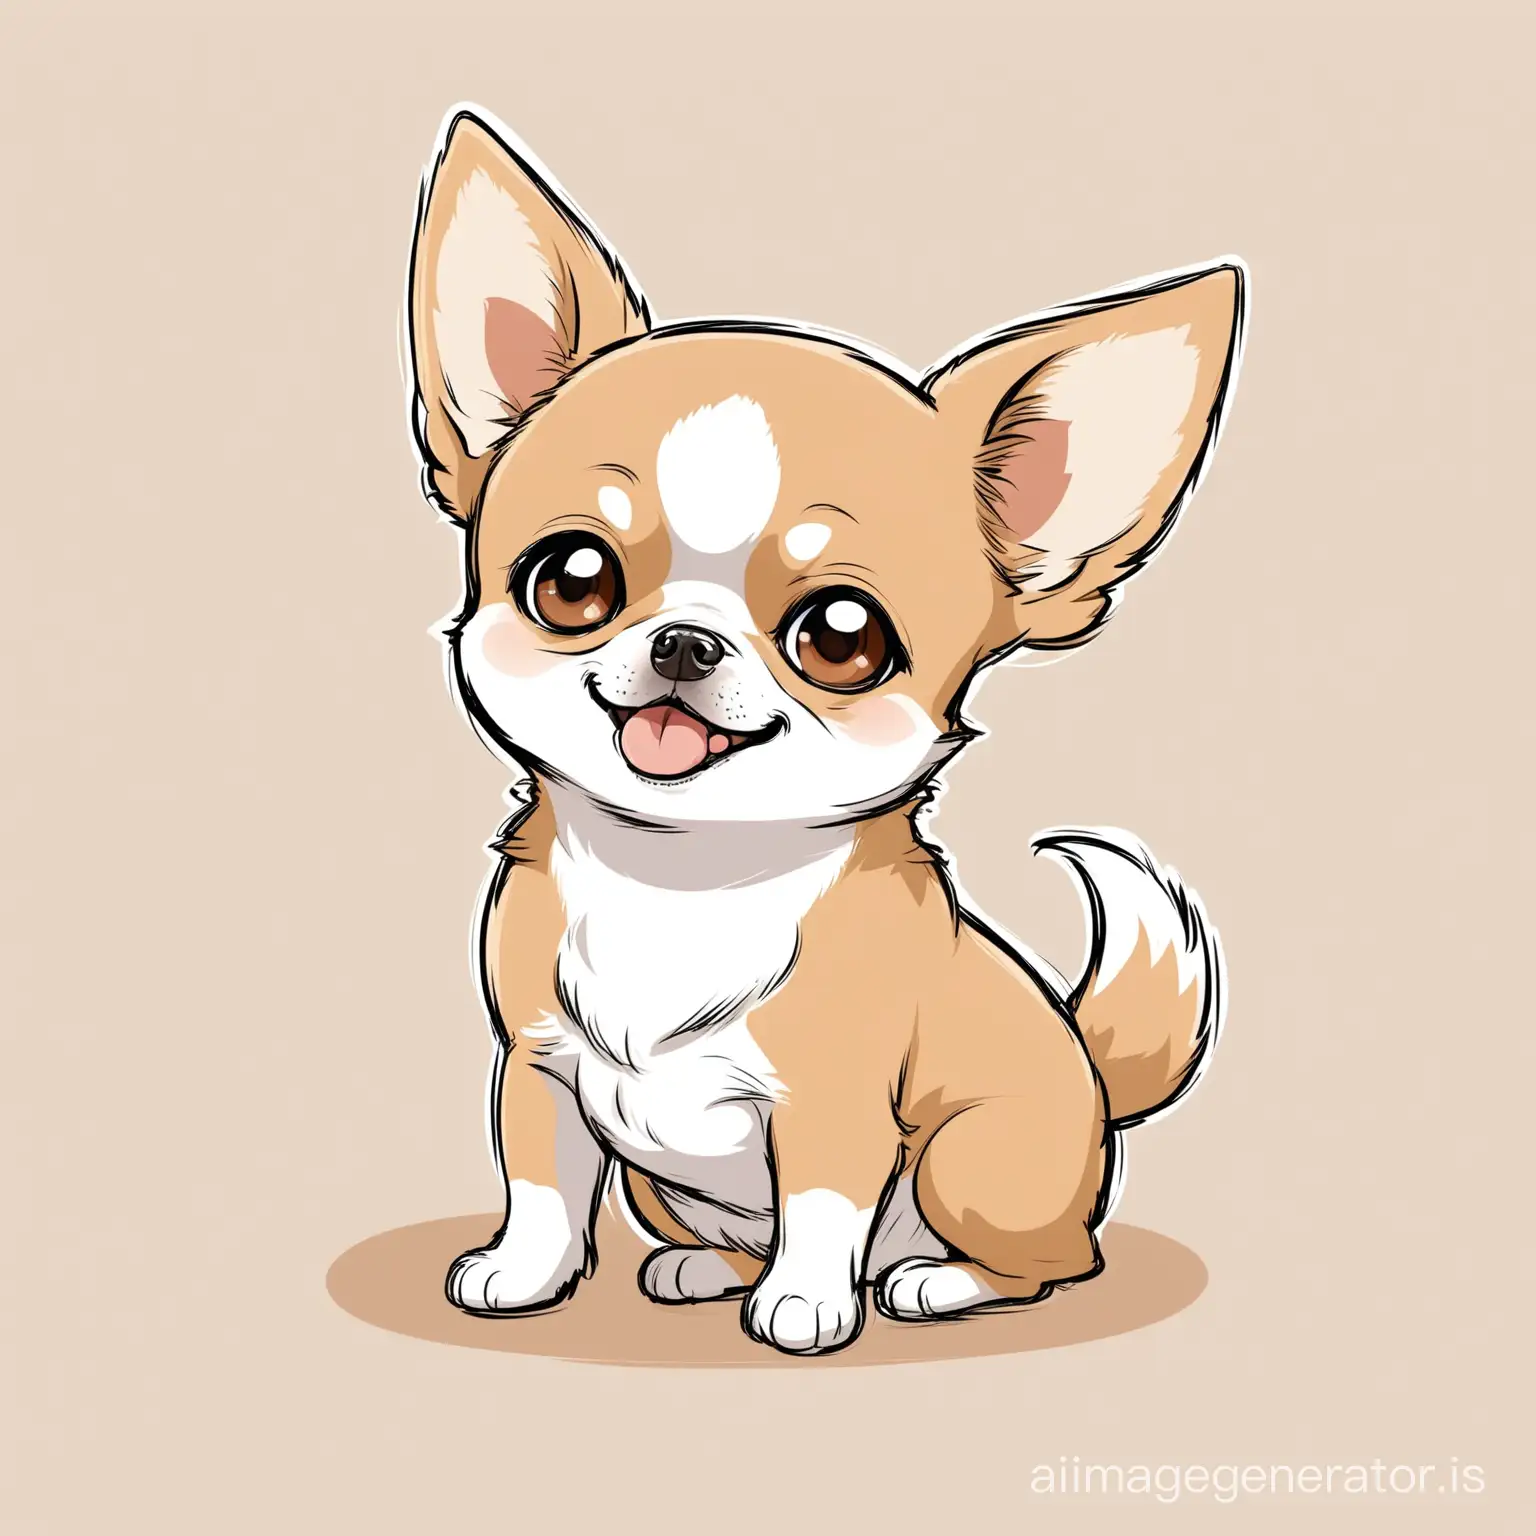 Adorable-Chihuahua-in-Yoga-Pose-Cartoon-Style